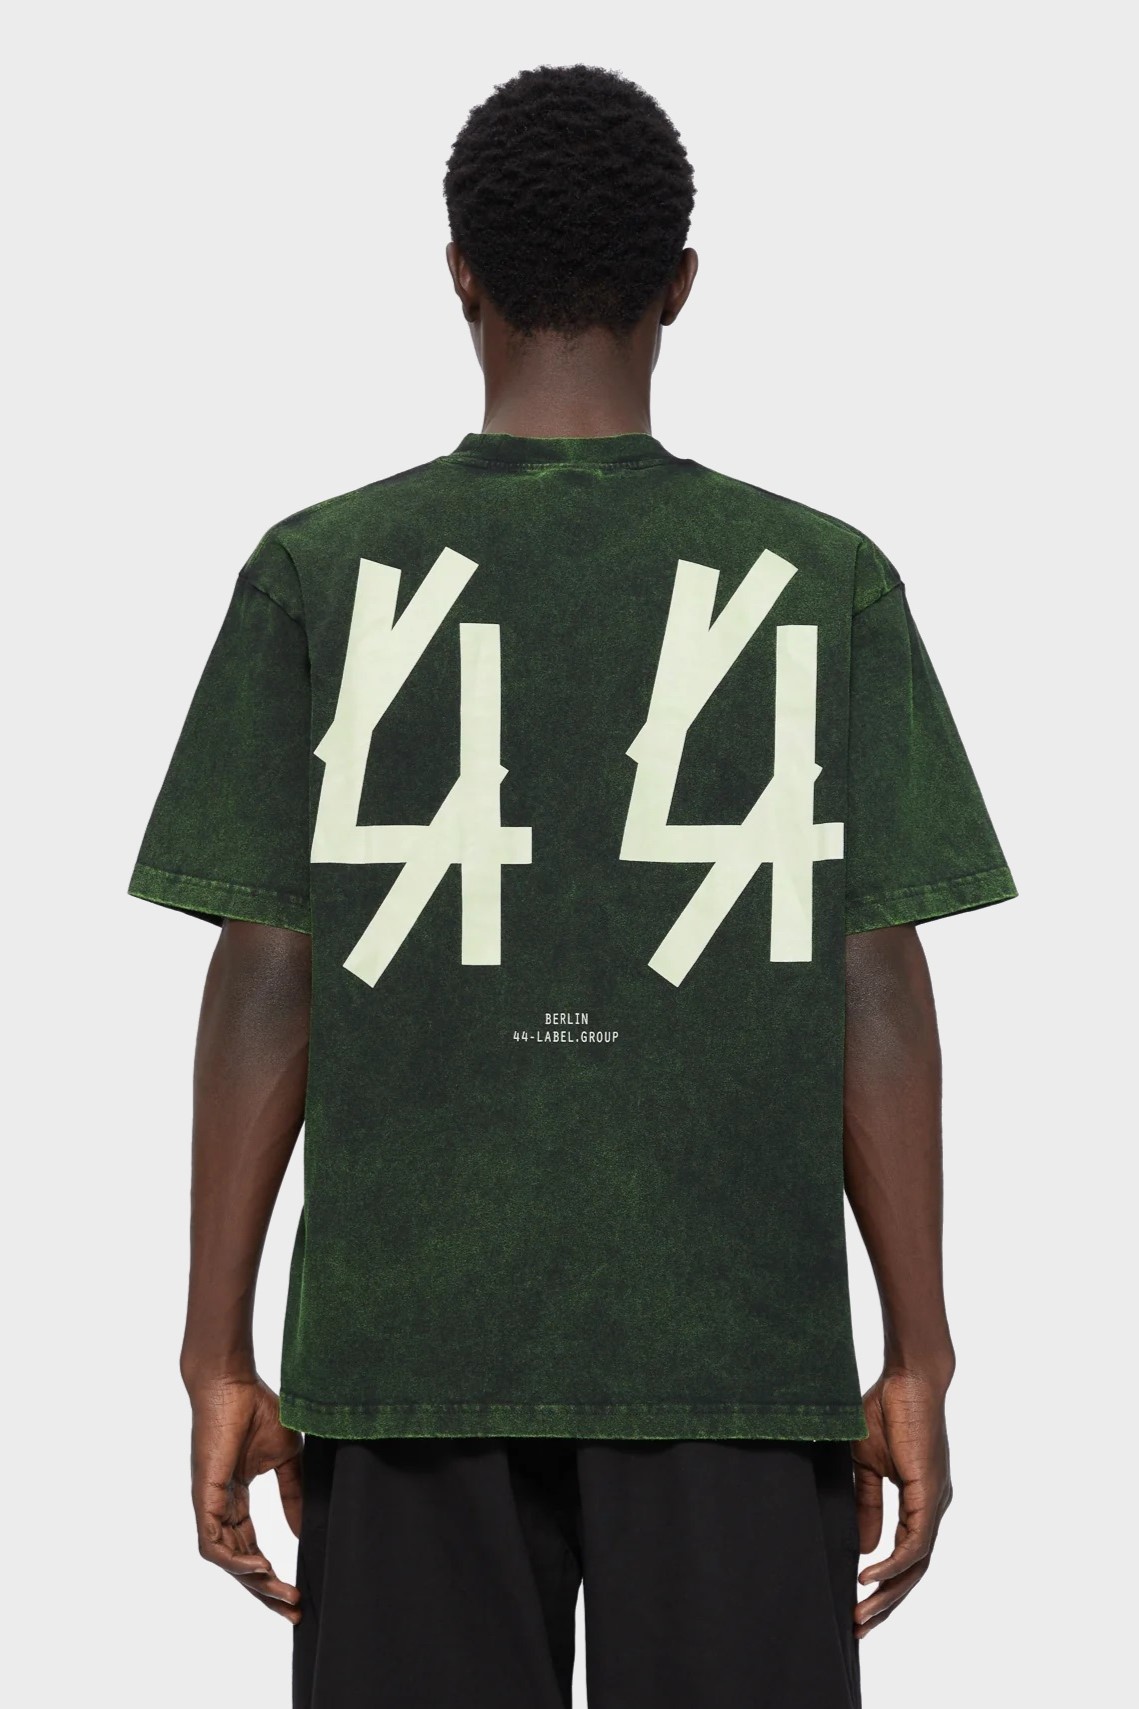 44 LABEL GROUP Overdied Solar Tee in Green S